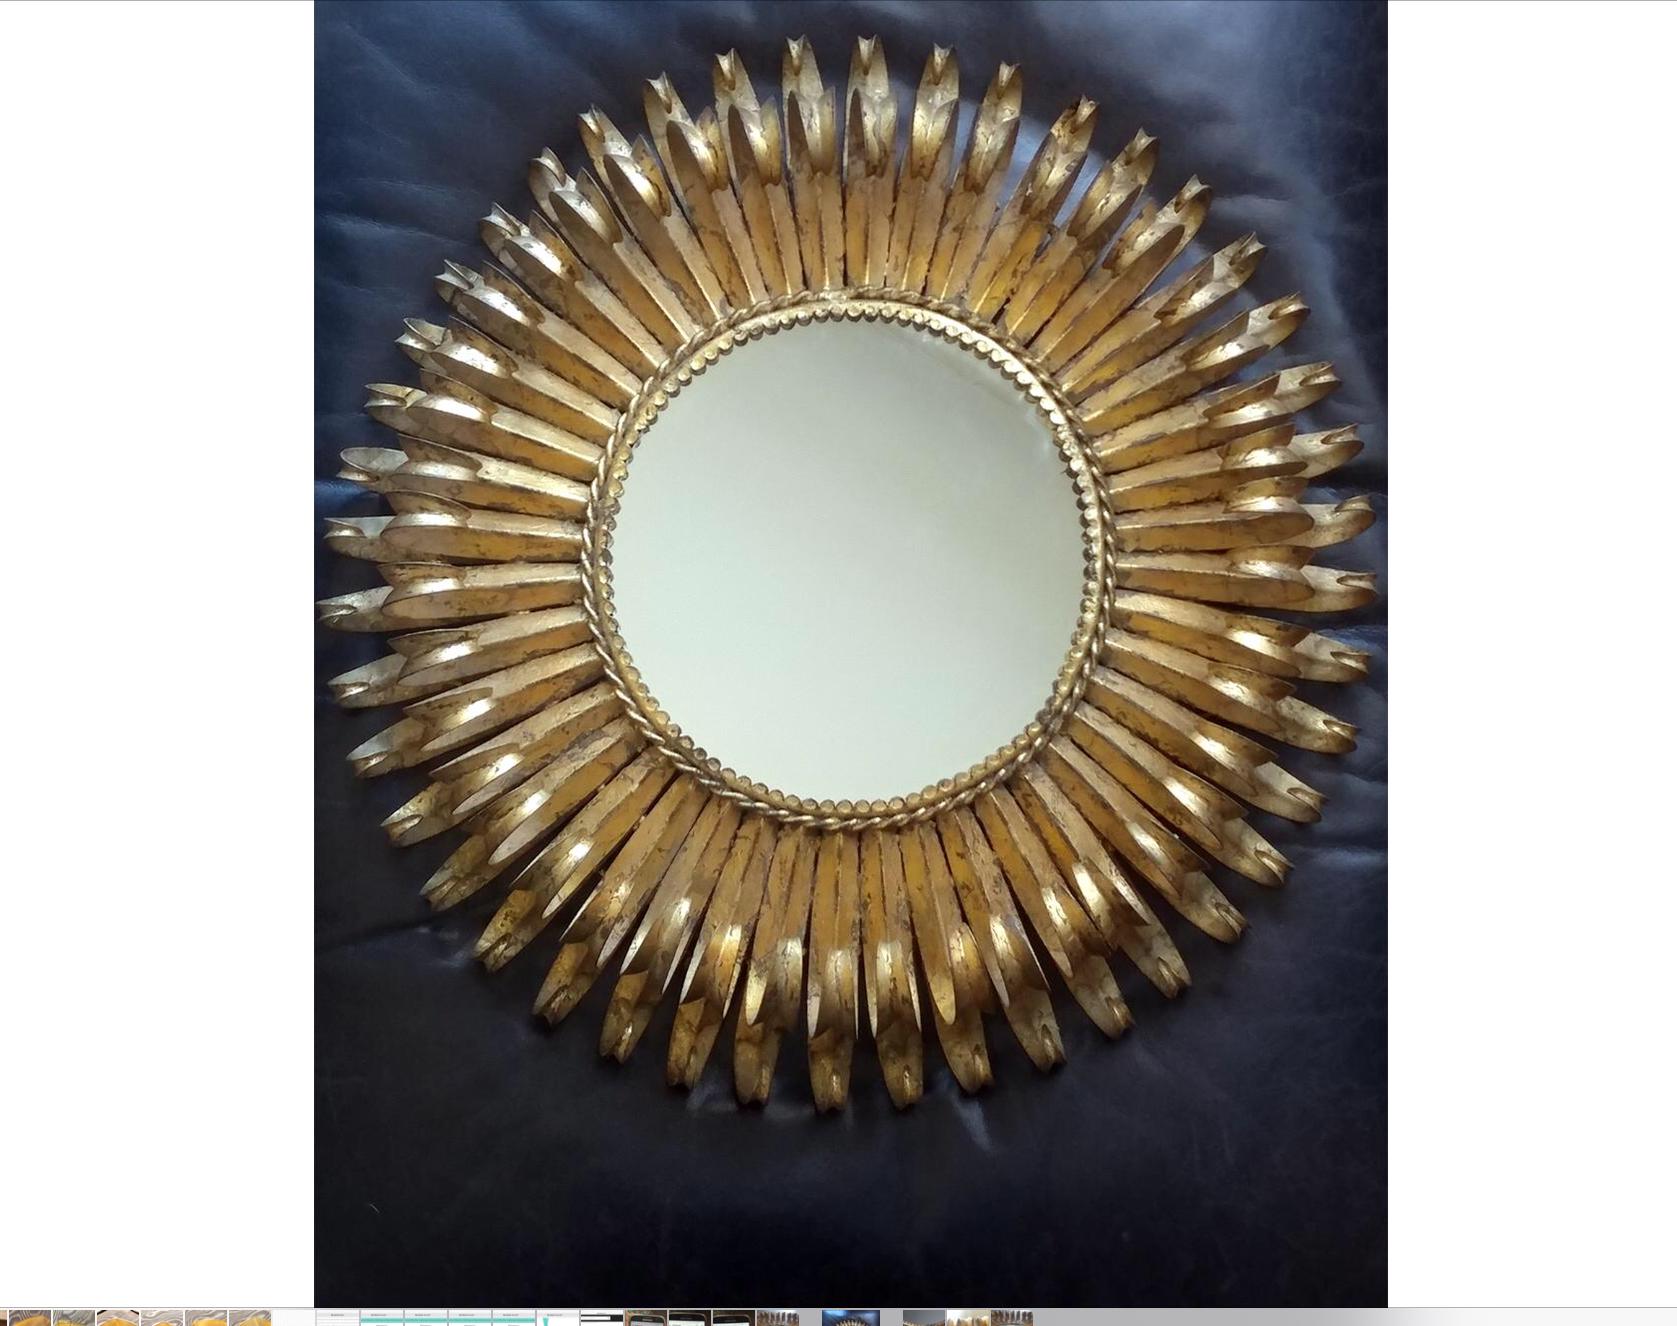 A hand forged iron vintage double tiered sunburst mirror from Spain.
Lovely patina wrought iron, gilt surface throughout. 
Circa 1950s in the Brutalist style.
The original Made in Spain tag intact.
The backing has been replaced due to old age